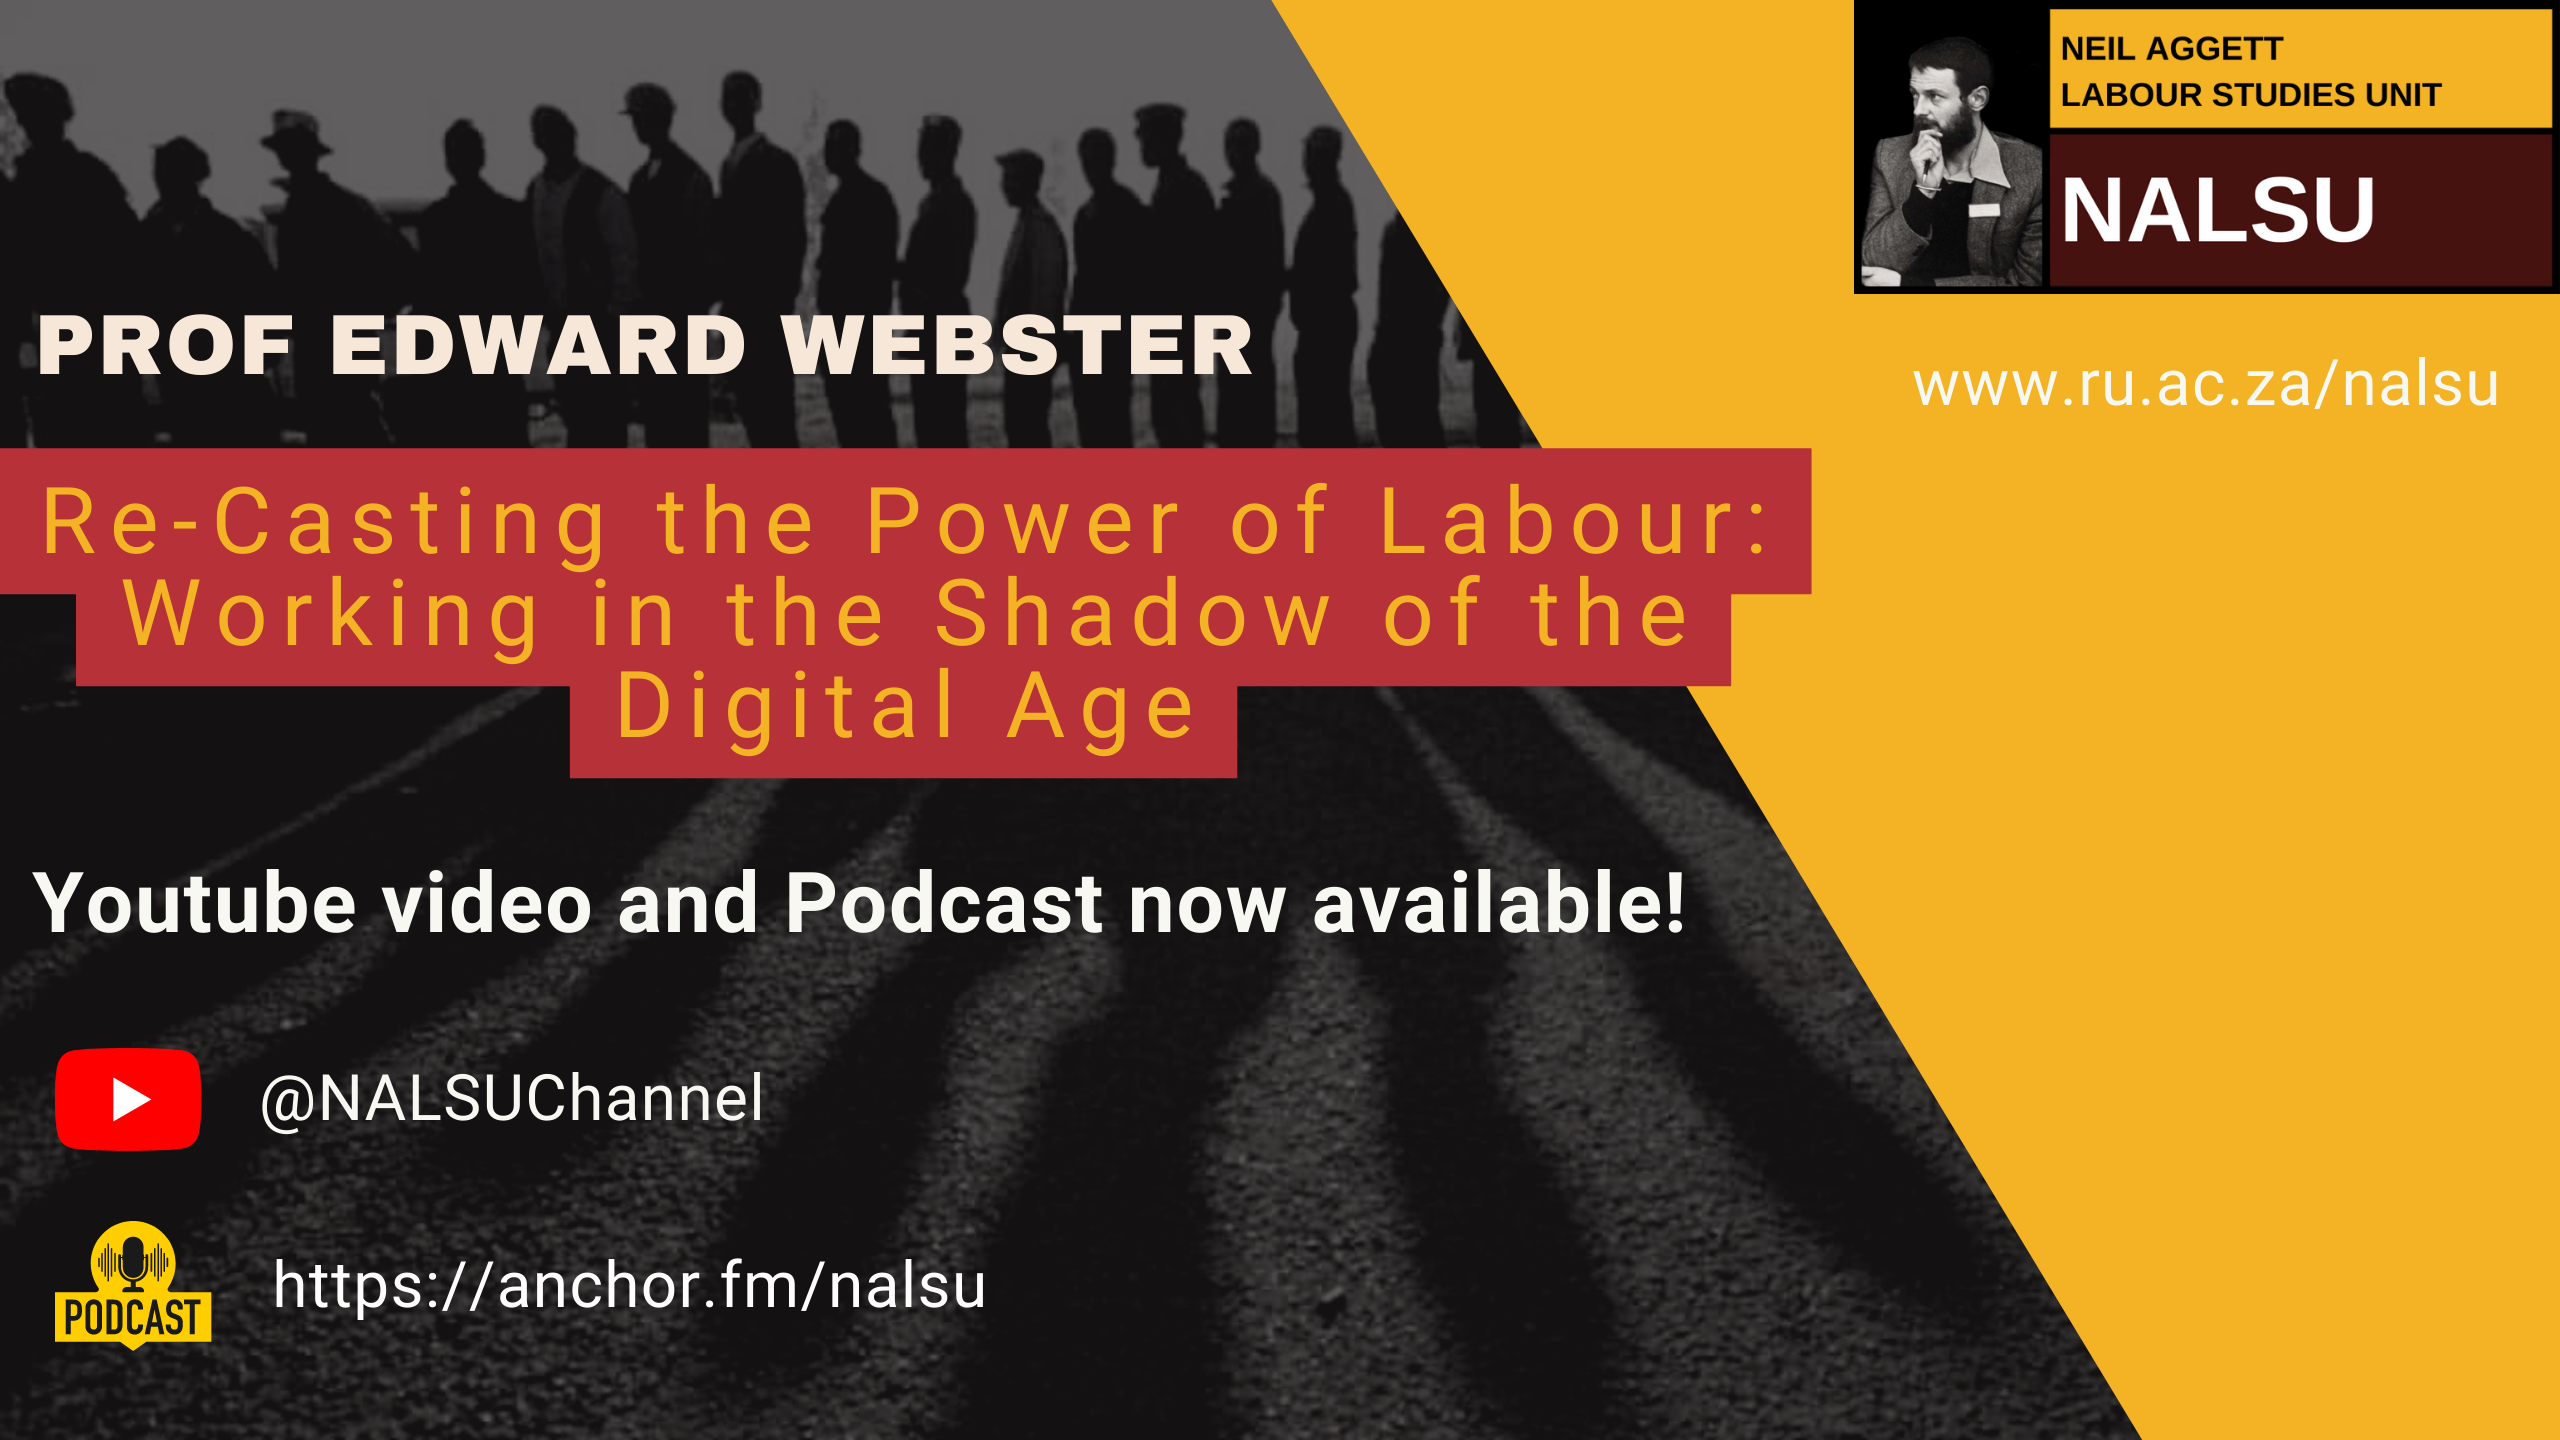 "Re-Casting the Power of Labour: Working in the Shadow of the Digital Age"